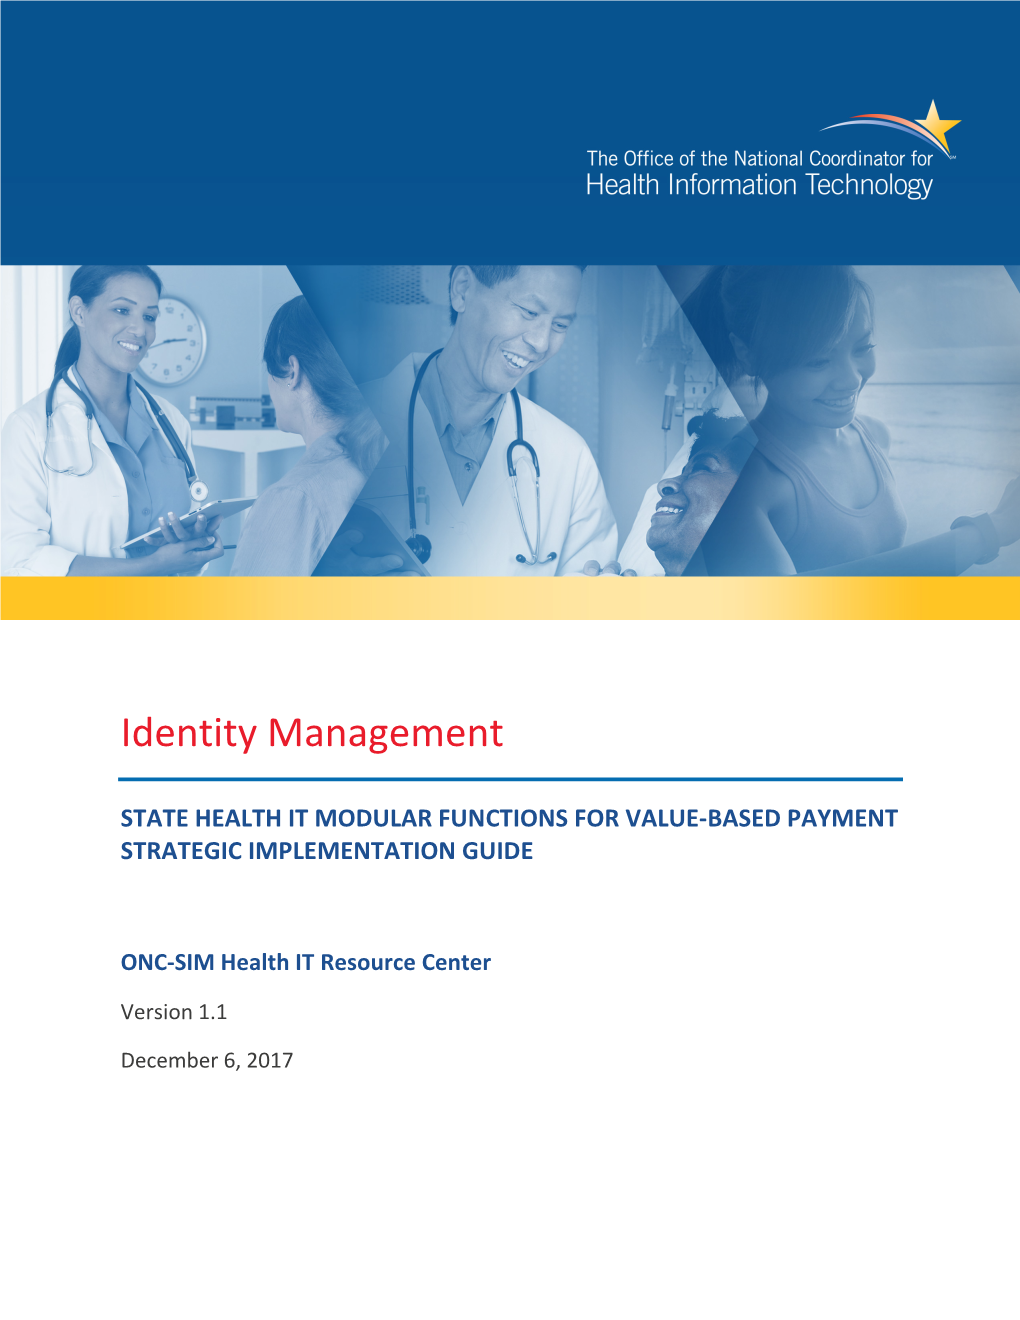 Identity Management: State Health IT Modular Functions for Value-Based Payment